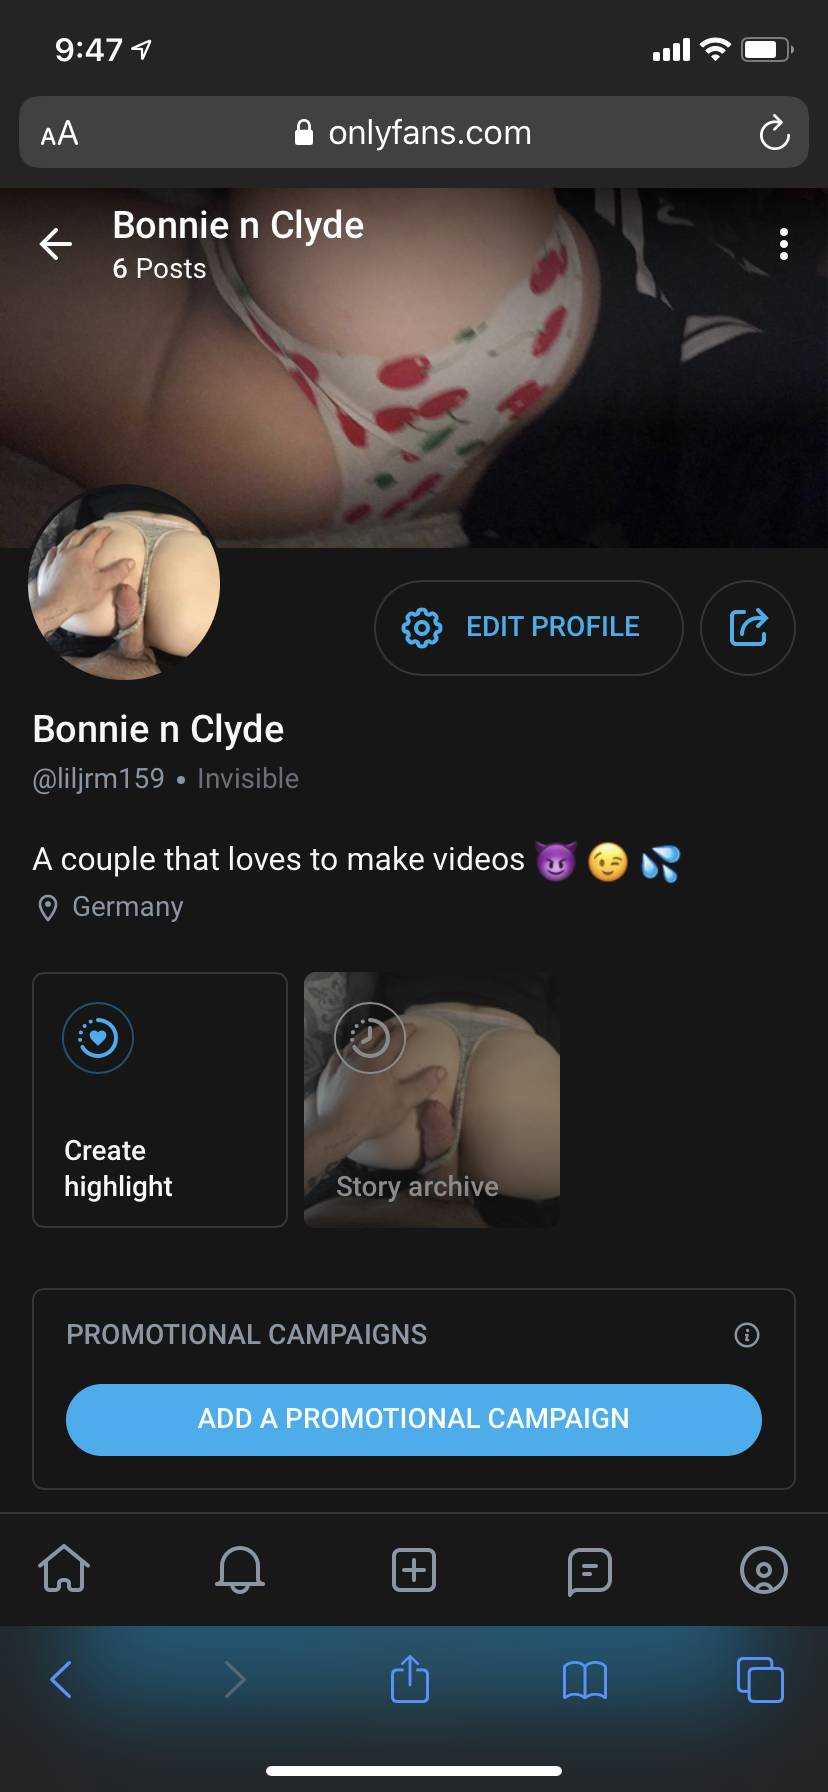 Photo by Bonnie n clyde with the username @liljman58,  August 26, 2020 at 6:23 PM. The post is about the topic blowjob